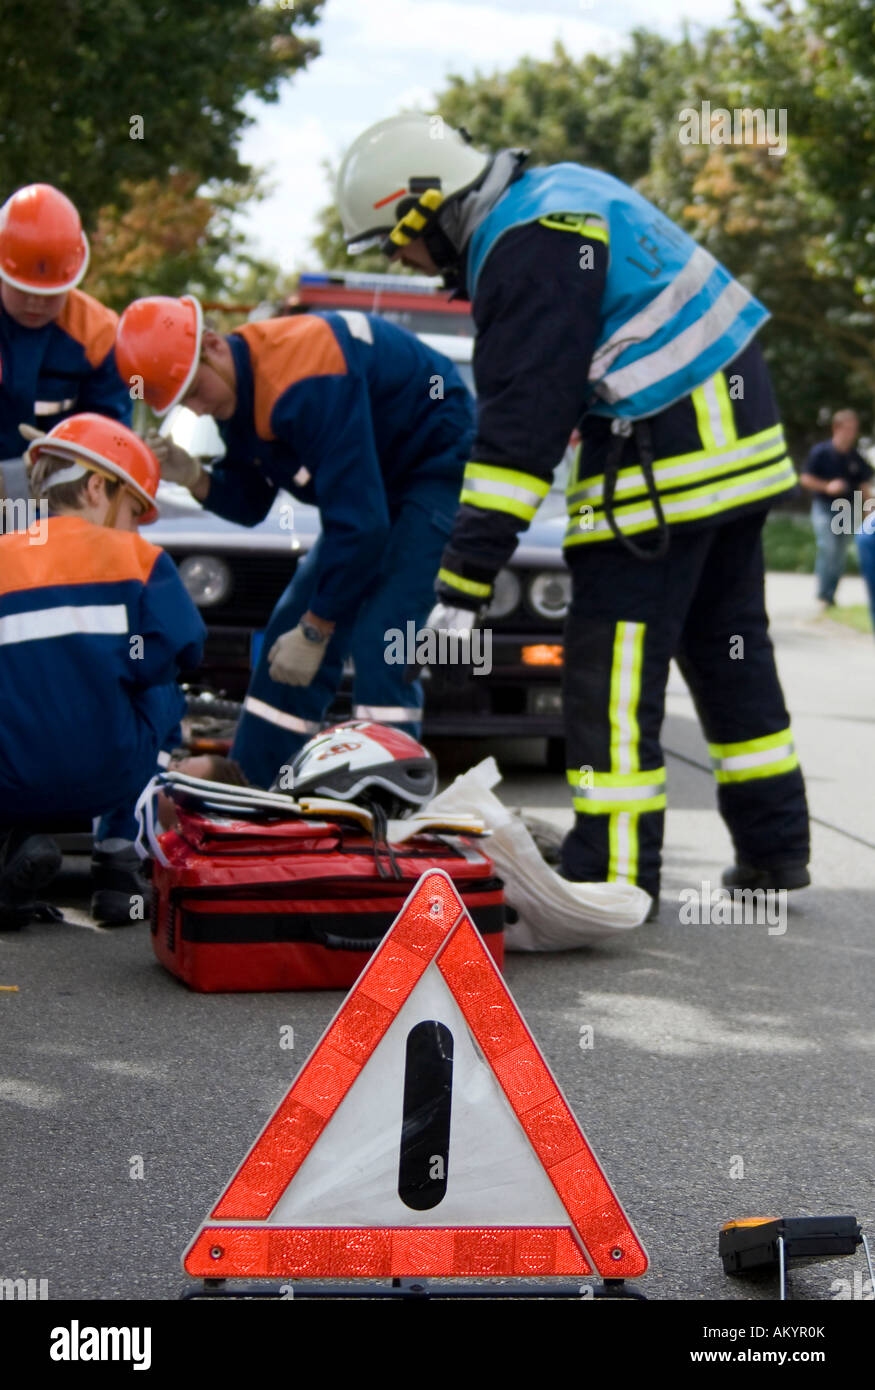 A youth fire brigade shows what to do at an scene of an accident Stock Photo